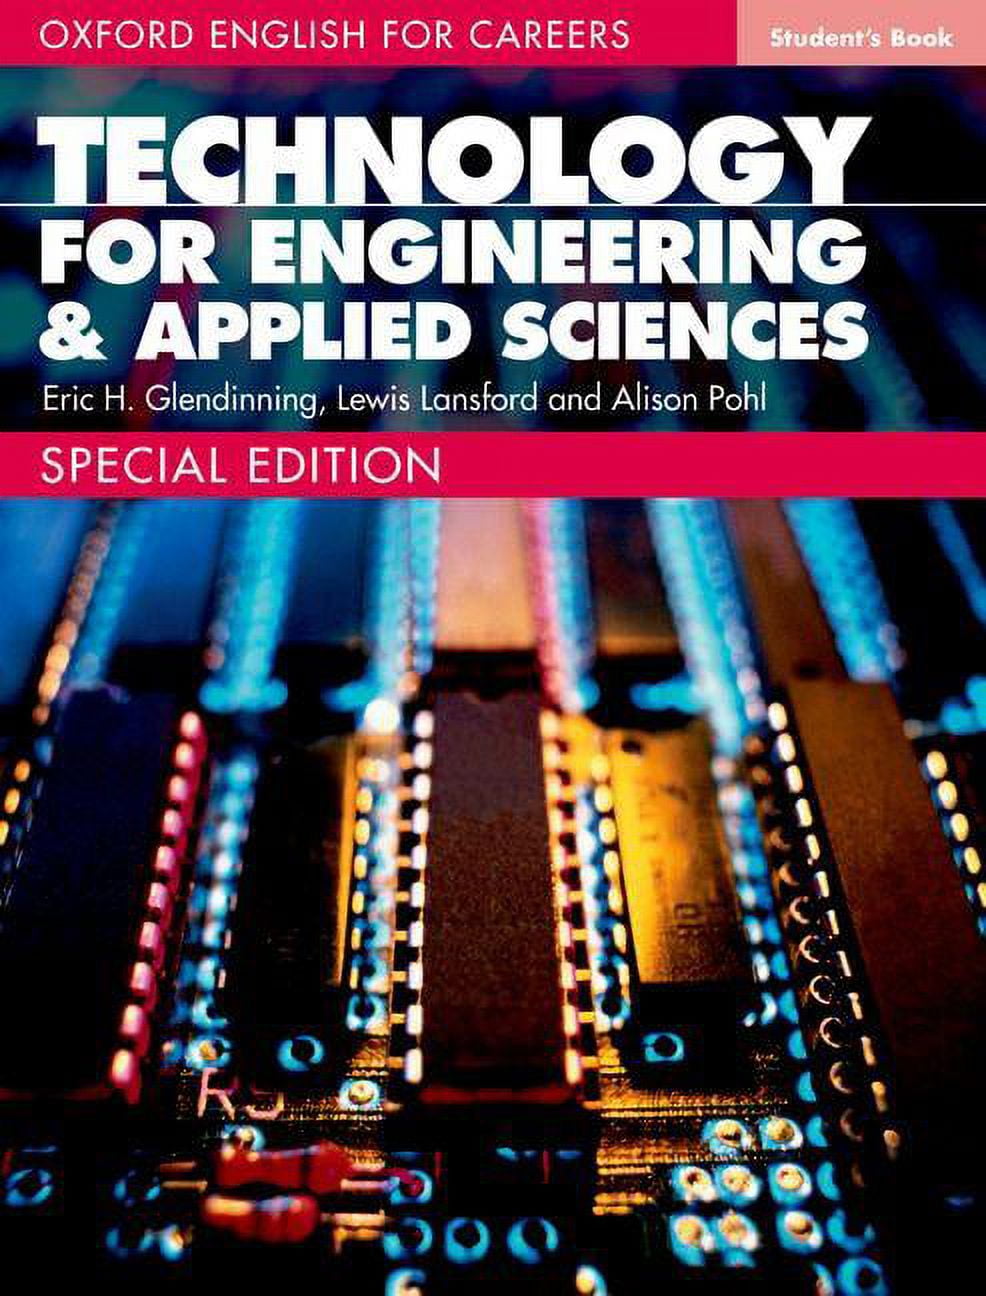 Engineering　Oxford　Technology　Careers　and　Sciences　for　English　Student　for　Applied　Book　(Paperback)